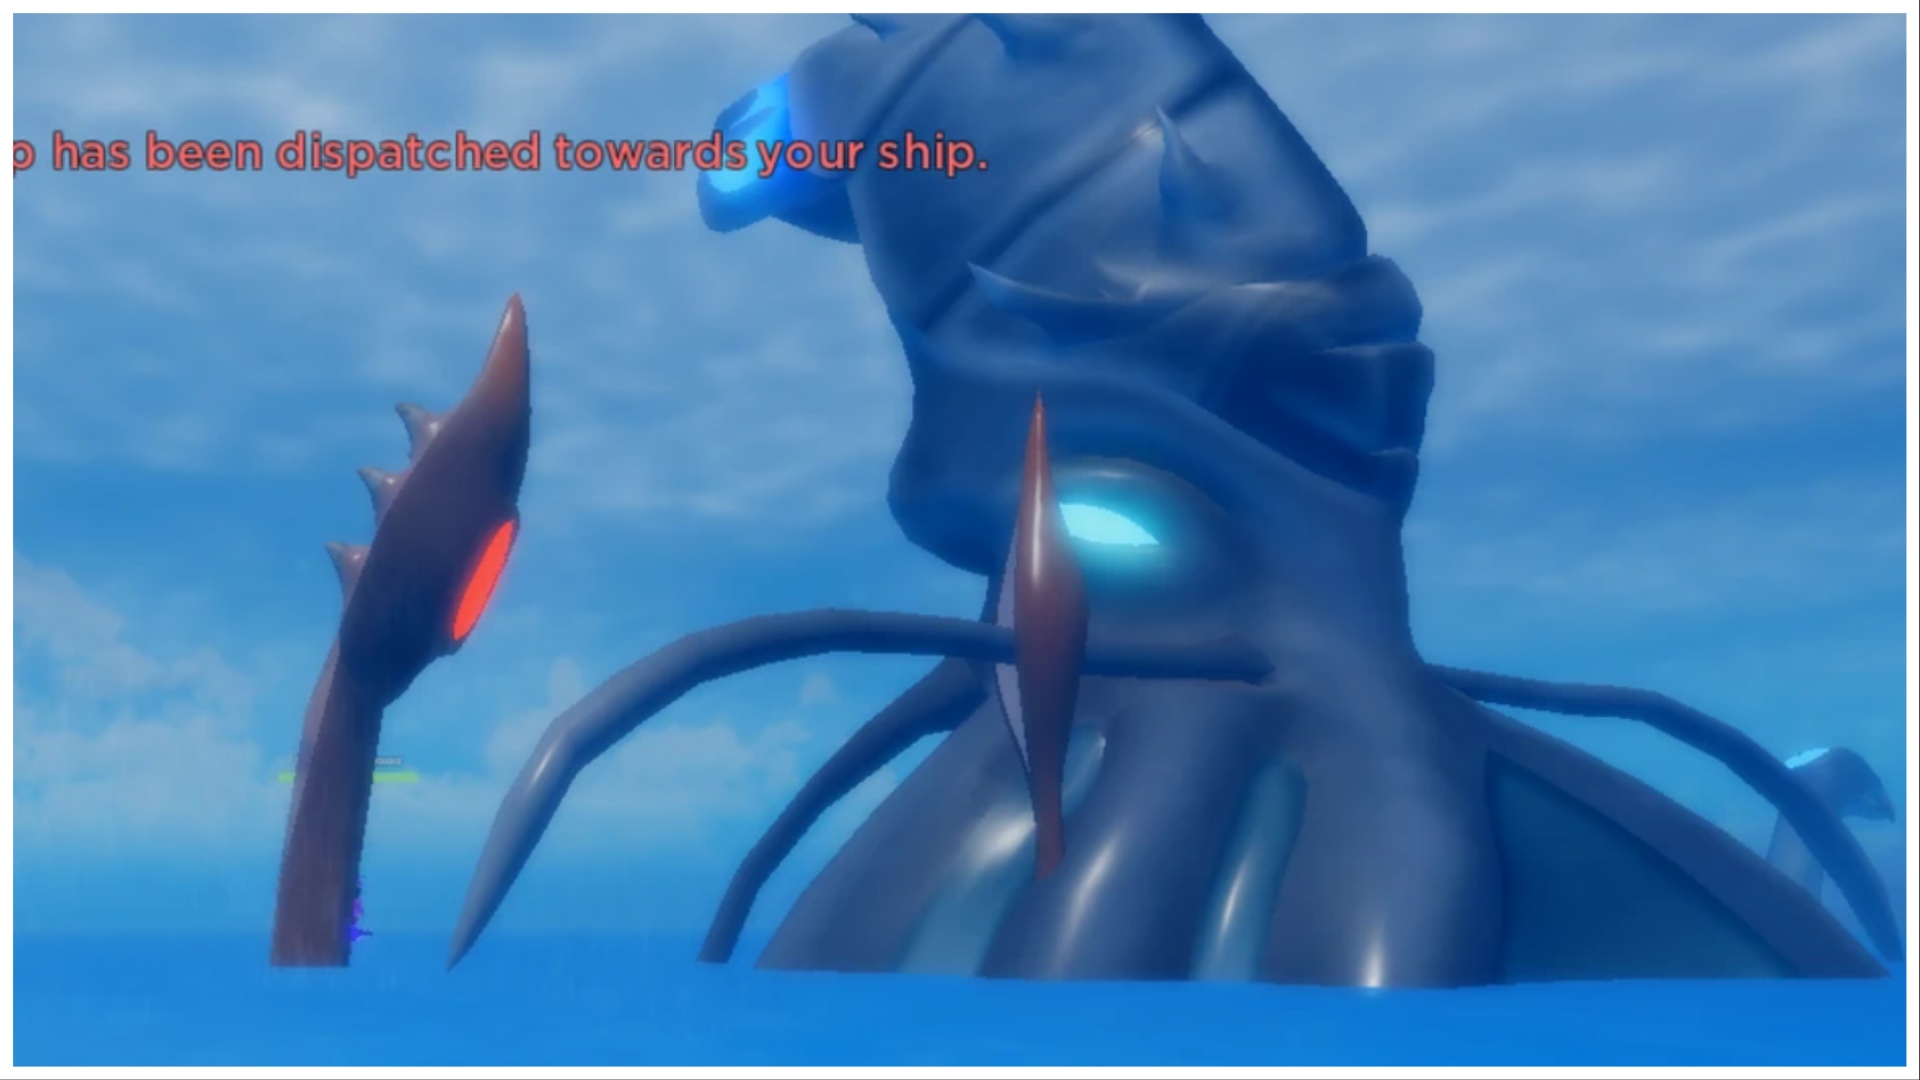 the image shows an upclose of the blue armoured kraken. The squid like beast has its head and a few tentacles sprouting from the water. Its eyes are glowing blue!